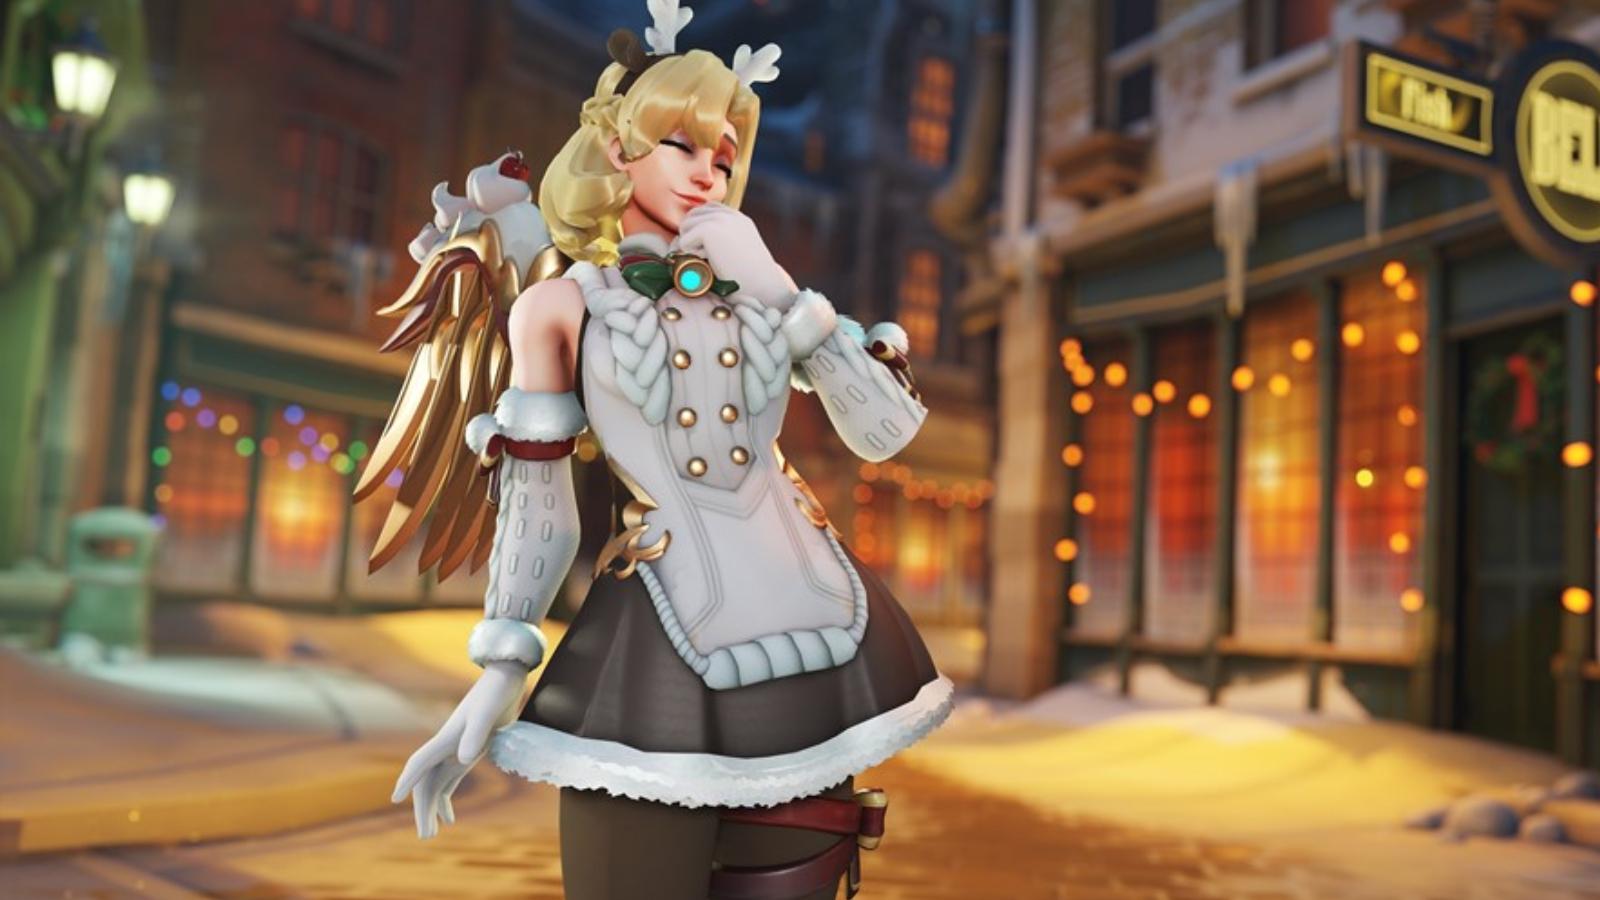 Overwatch 2 fans perplexed as Christmas Mercy skin is releasing after